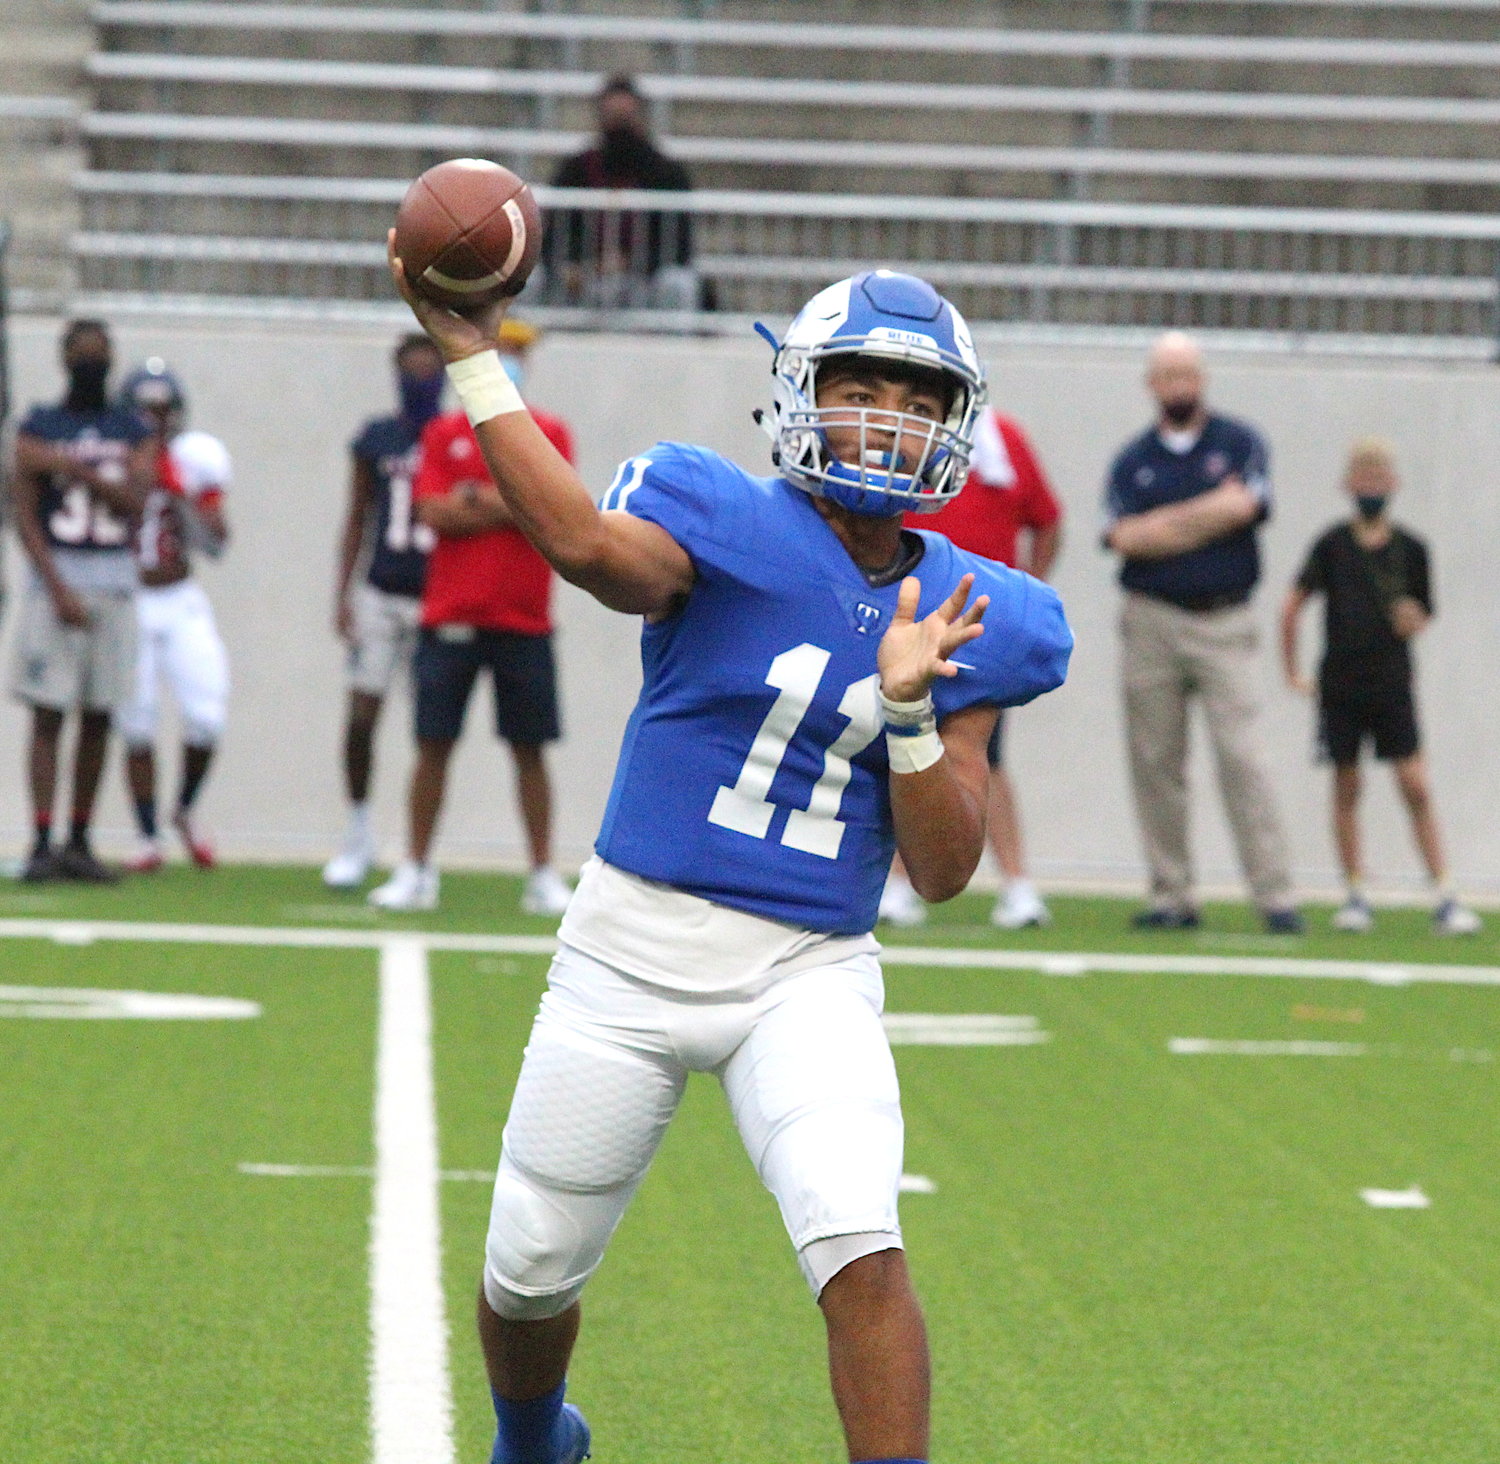 Taylor senior quarterback J Jensen III completed 15 of 17 passes for 257 yards and two touchdowns and rushed for 34 yards and two more touchdowns in the Mustangs' 31-14 win over Morton Ranch on Oct. 10 at Legacy Stadium.